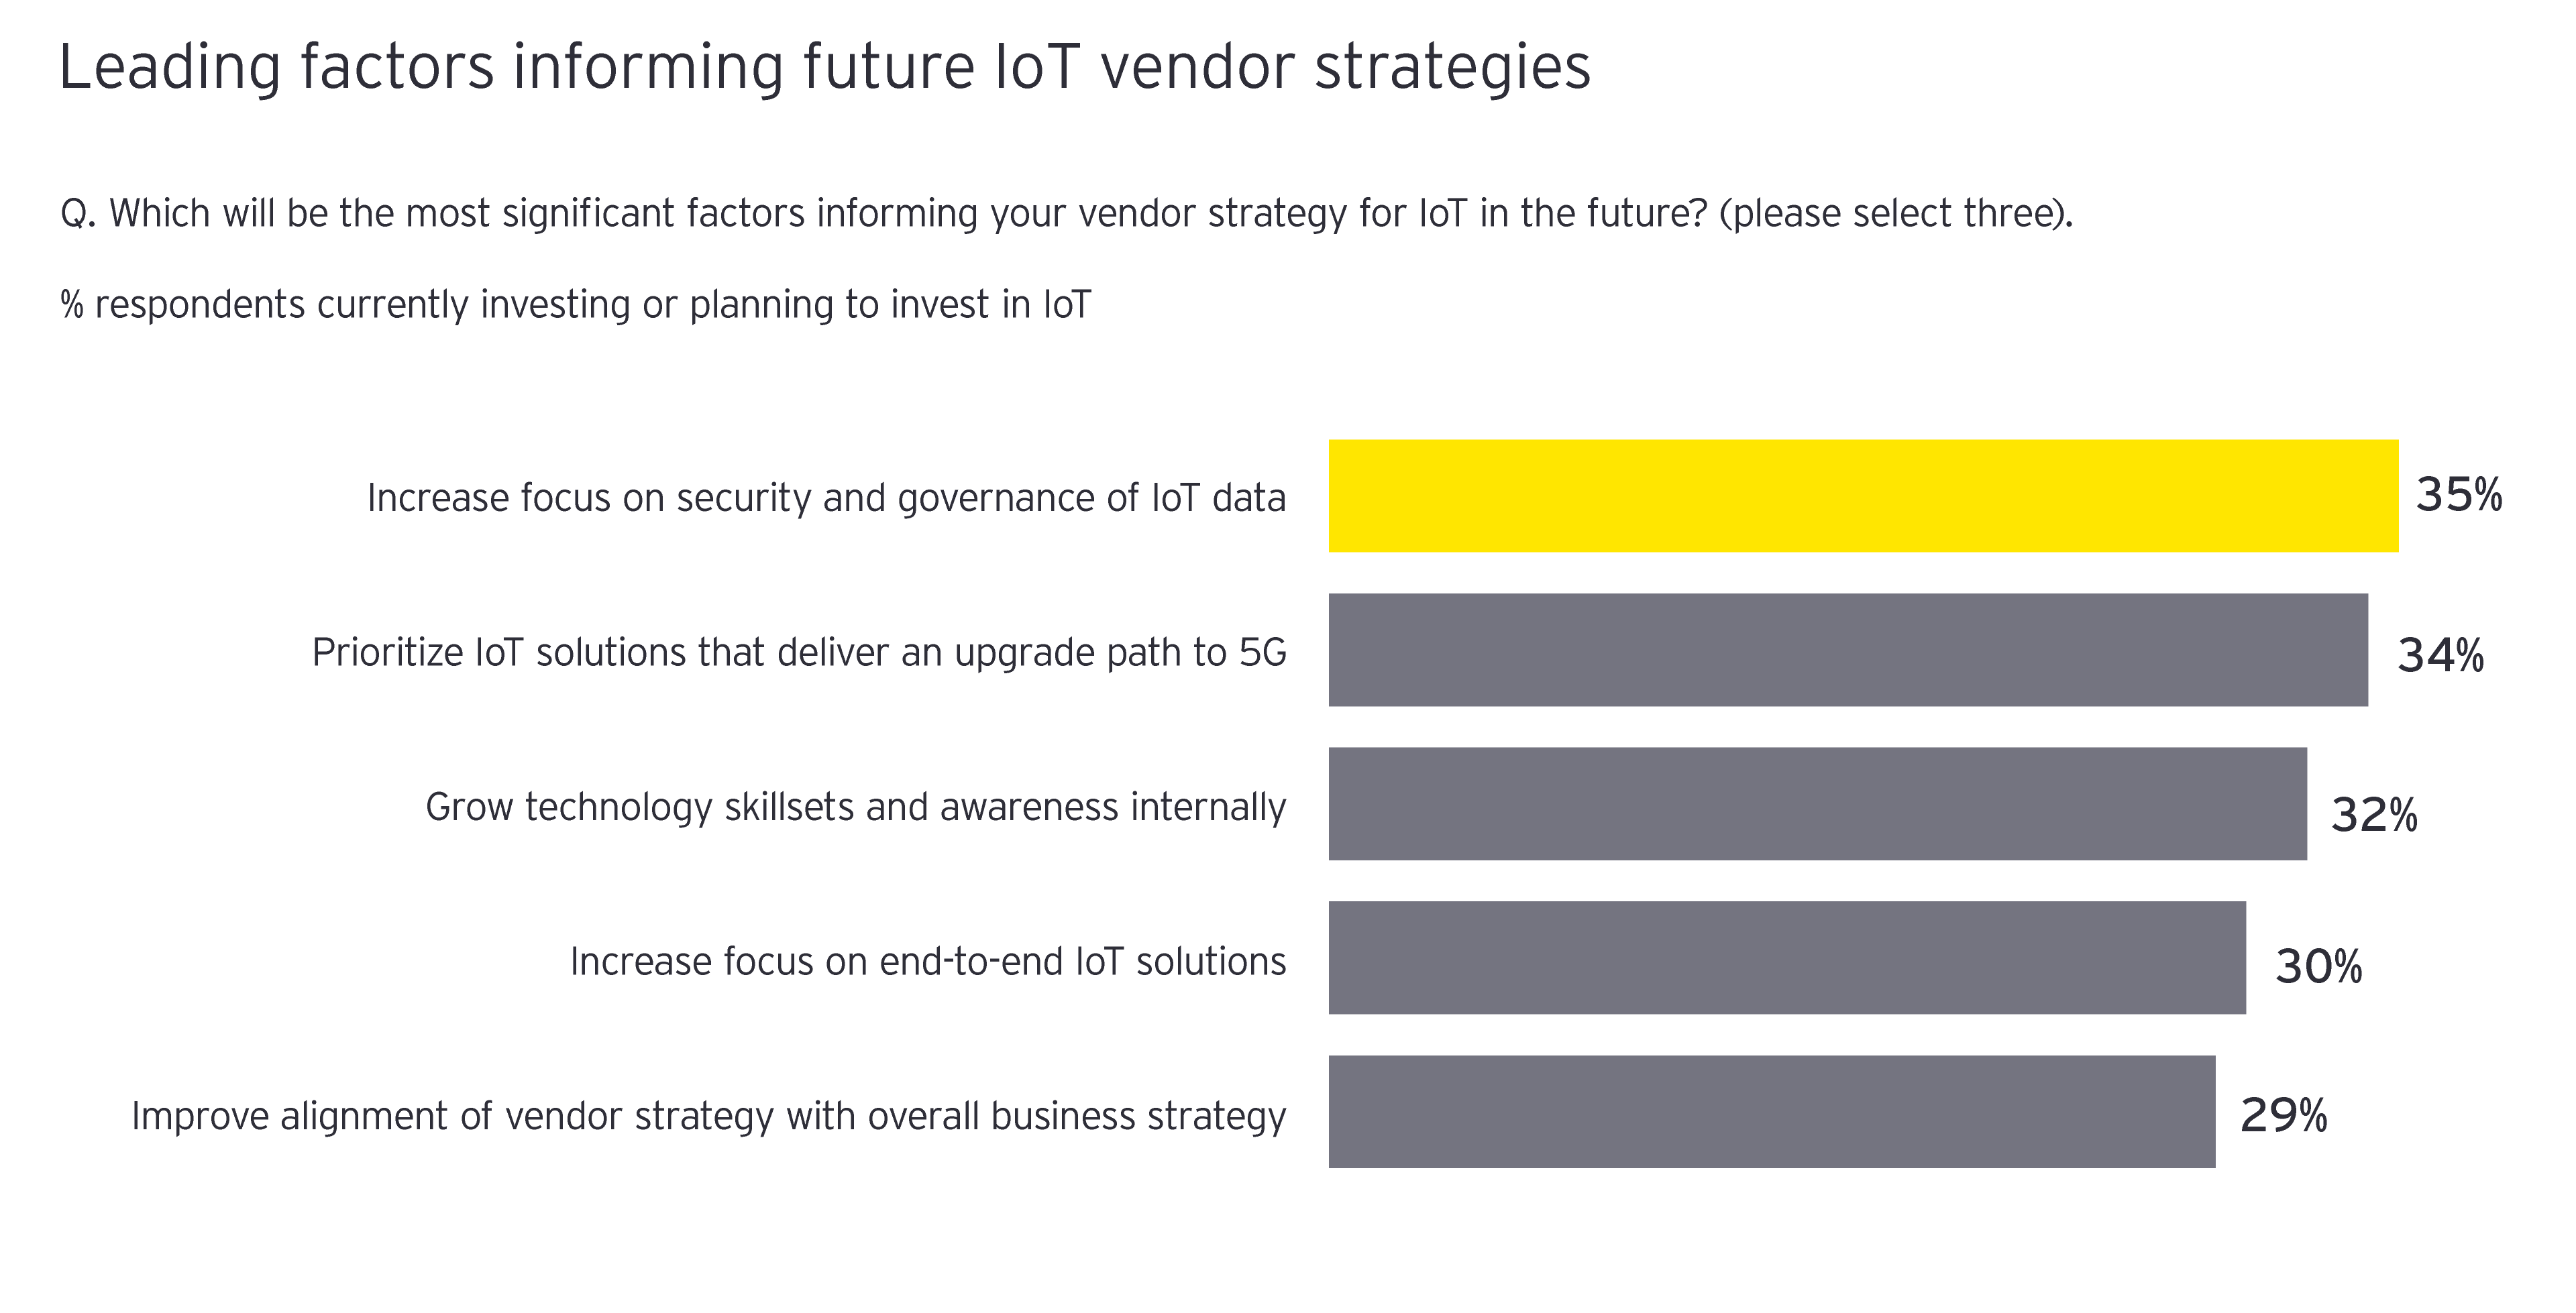 Enterprise trust in suppliers for IoT graph